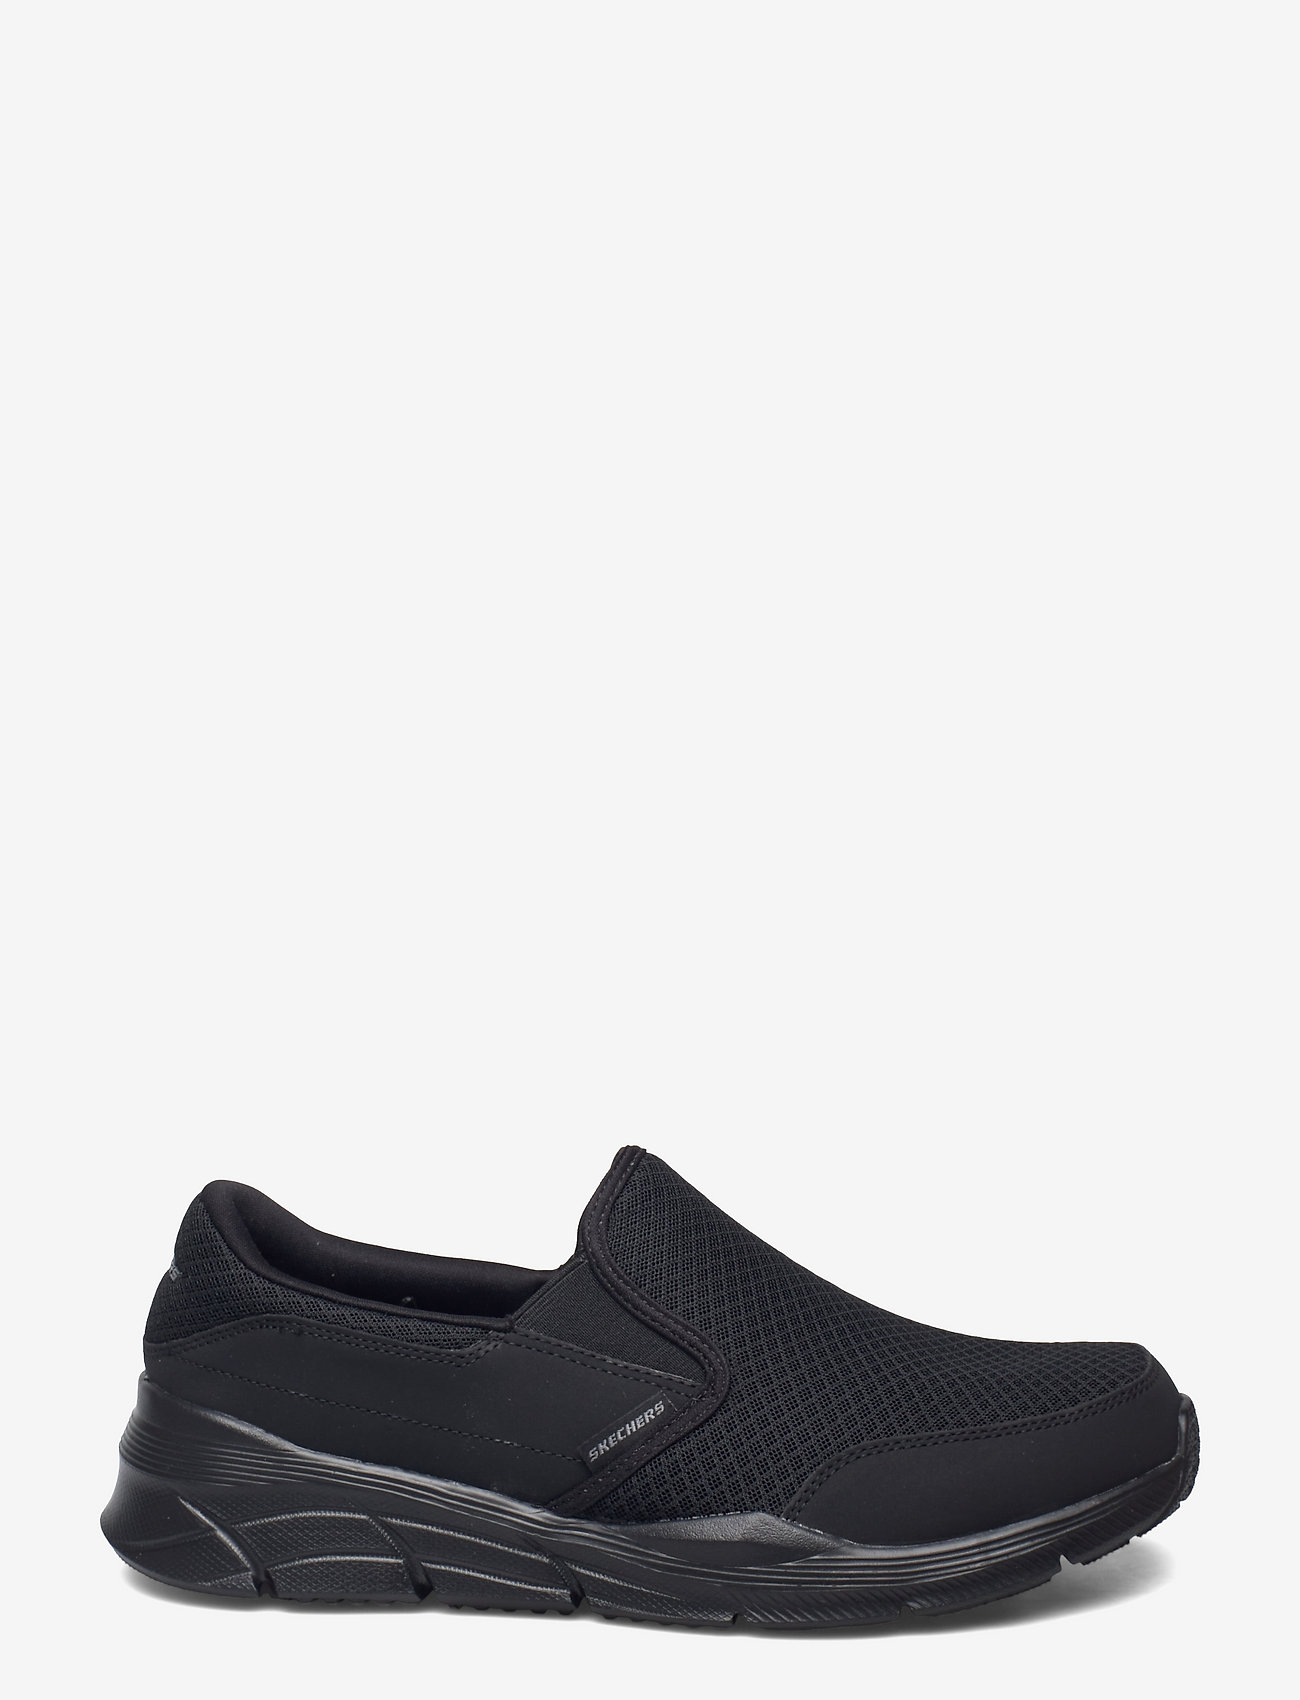 Skechers - Mens Relaxed Fit  Equalizer 4.0 - Persisting - laag sneakers - bbk black - 1